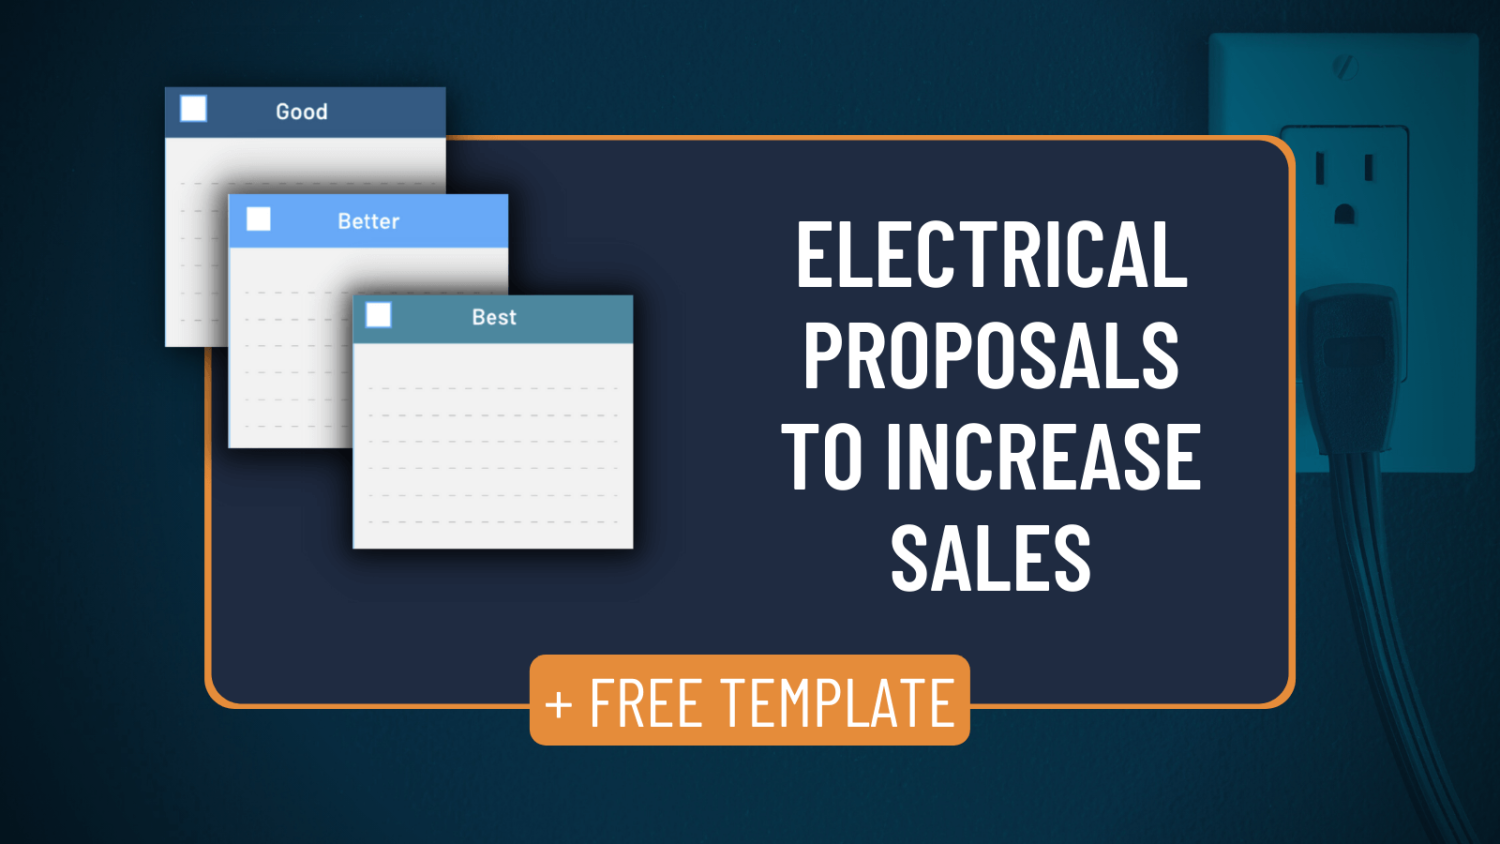 free-electrical-proposal-template-present-good-better-best